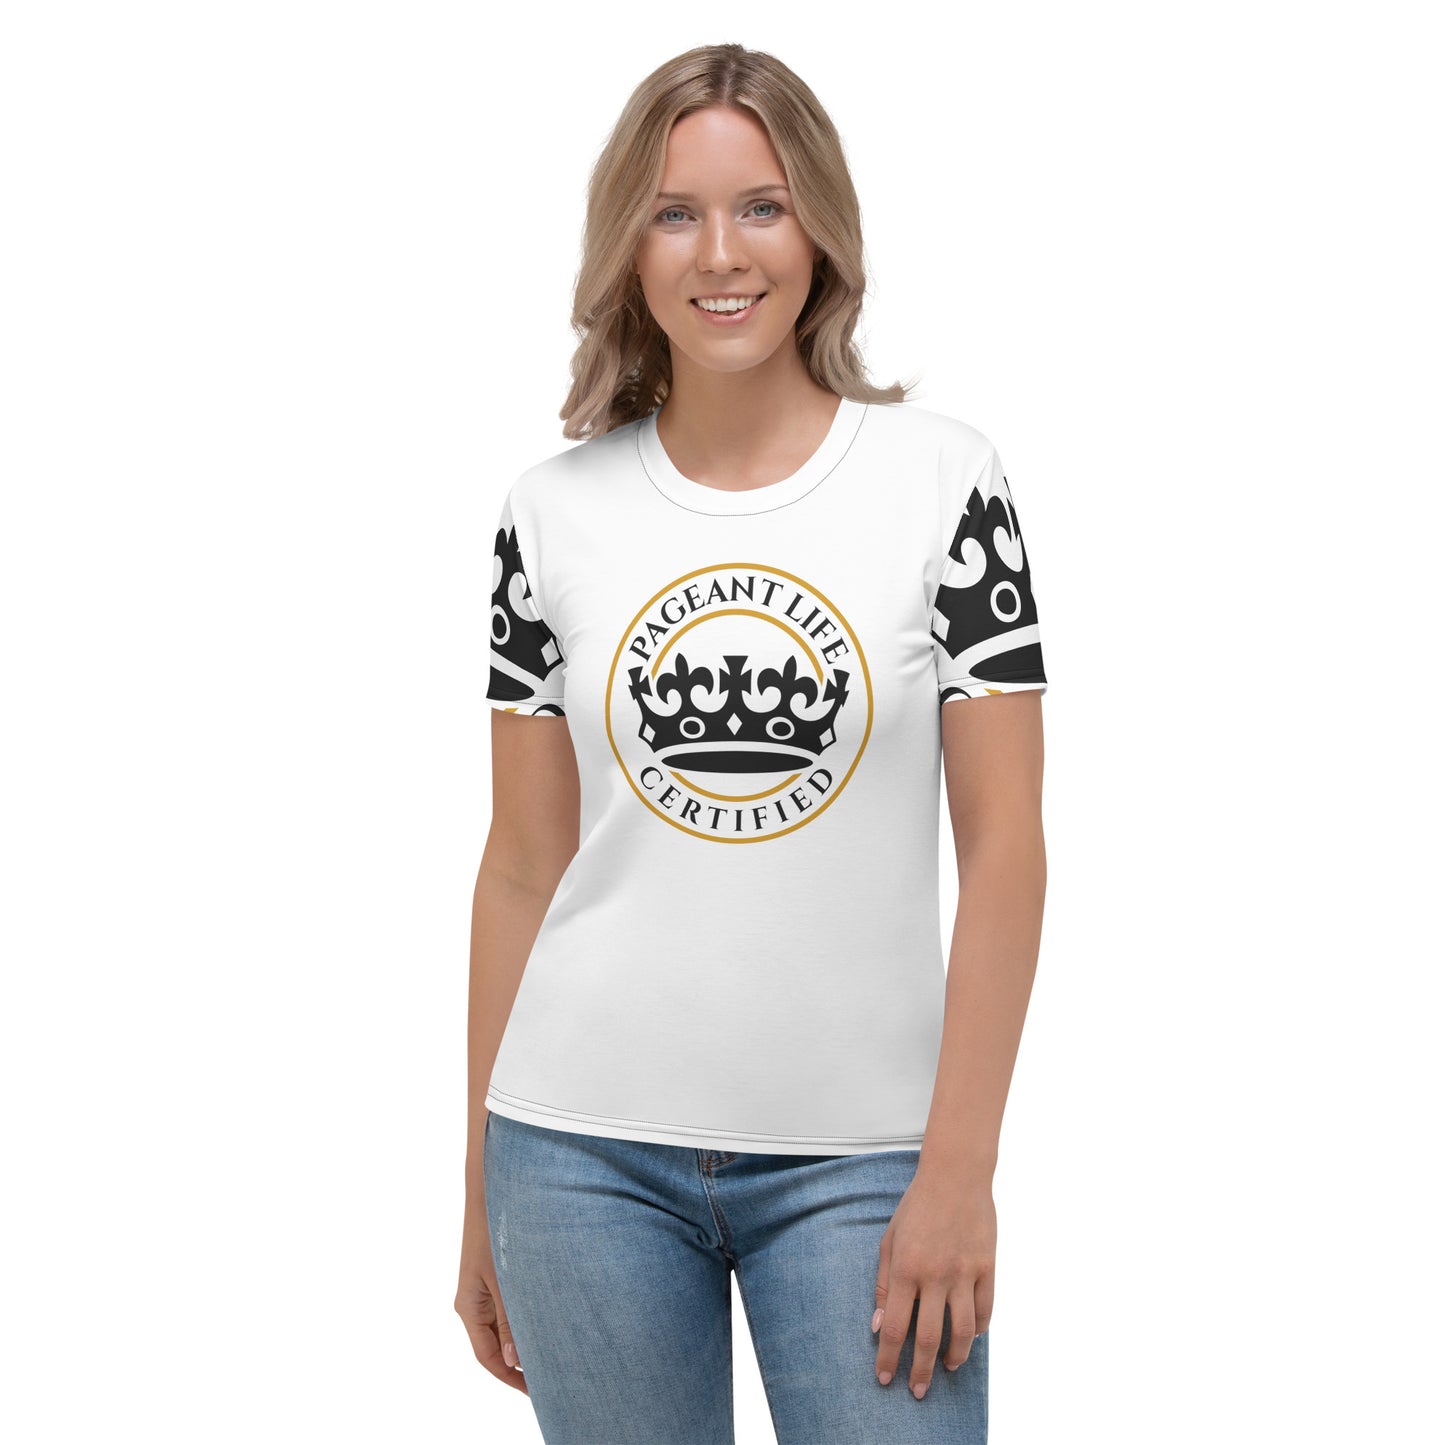 Black and Gold/ White Pageant Life Certified Women's T-shirt